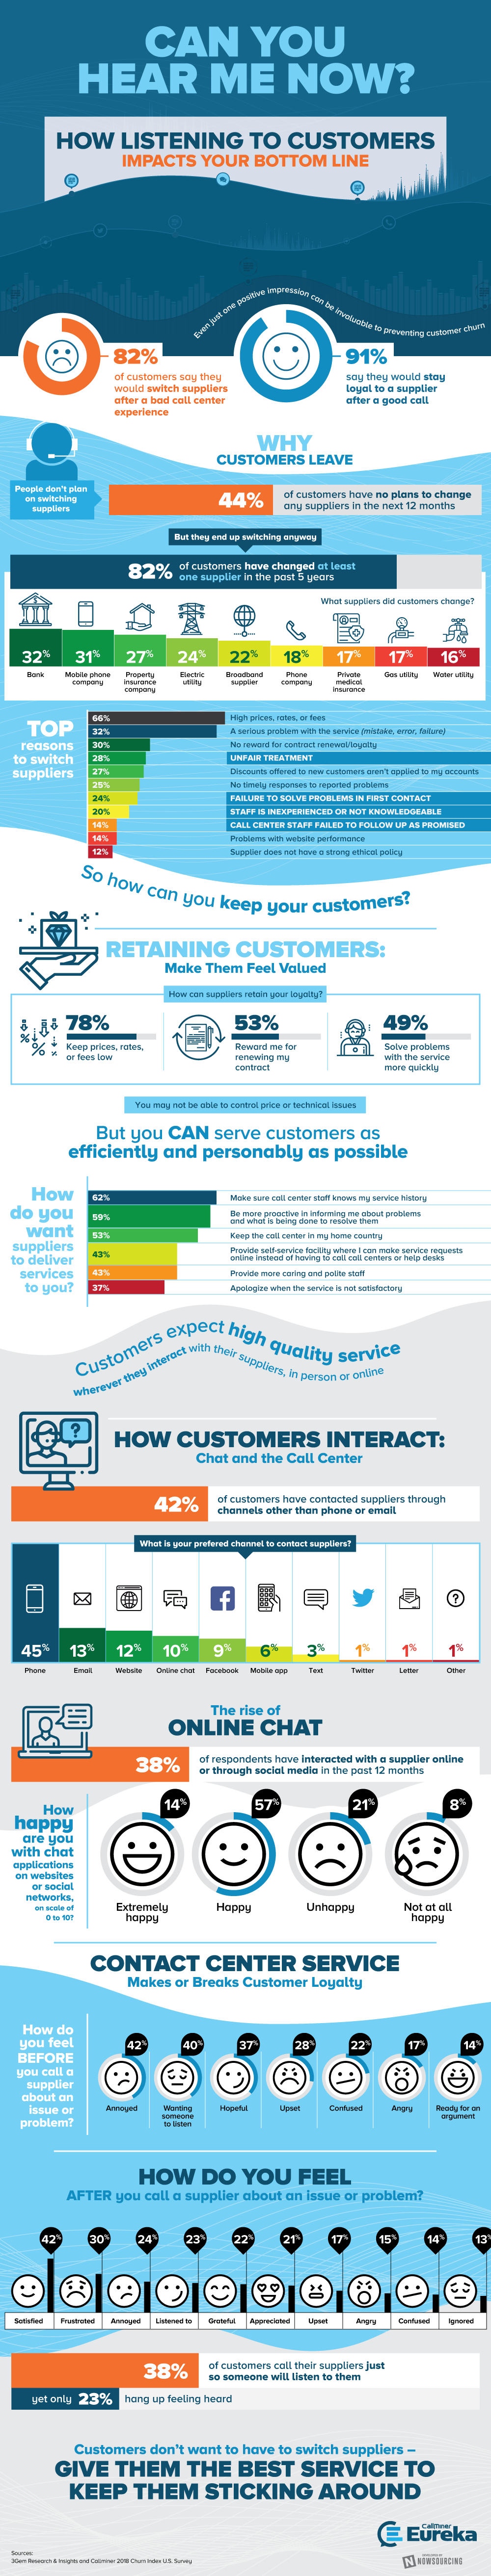 Every business relies on repeat customers, but not listening to customers is the best way to ensure they leave. This infographic outlines common reasons for customer churn and what to do to prevent it.